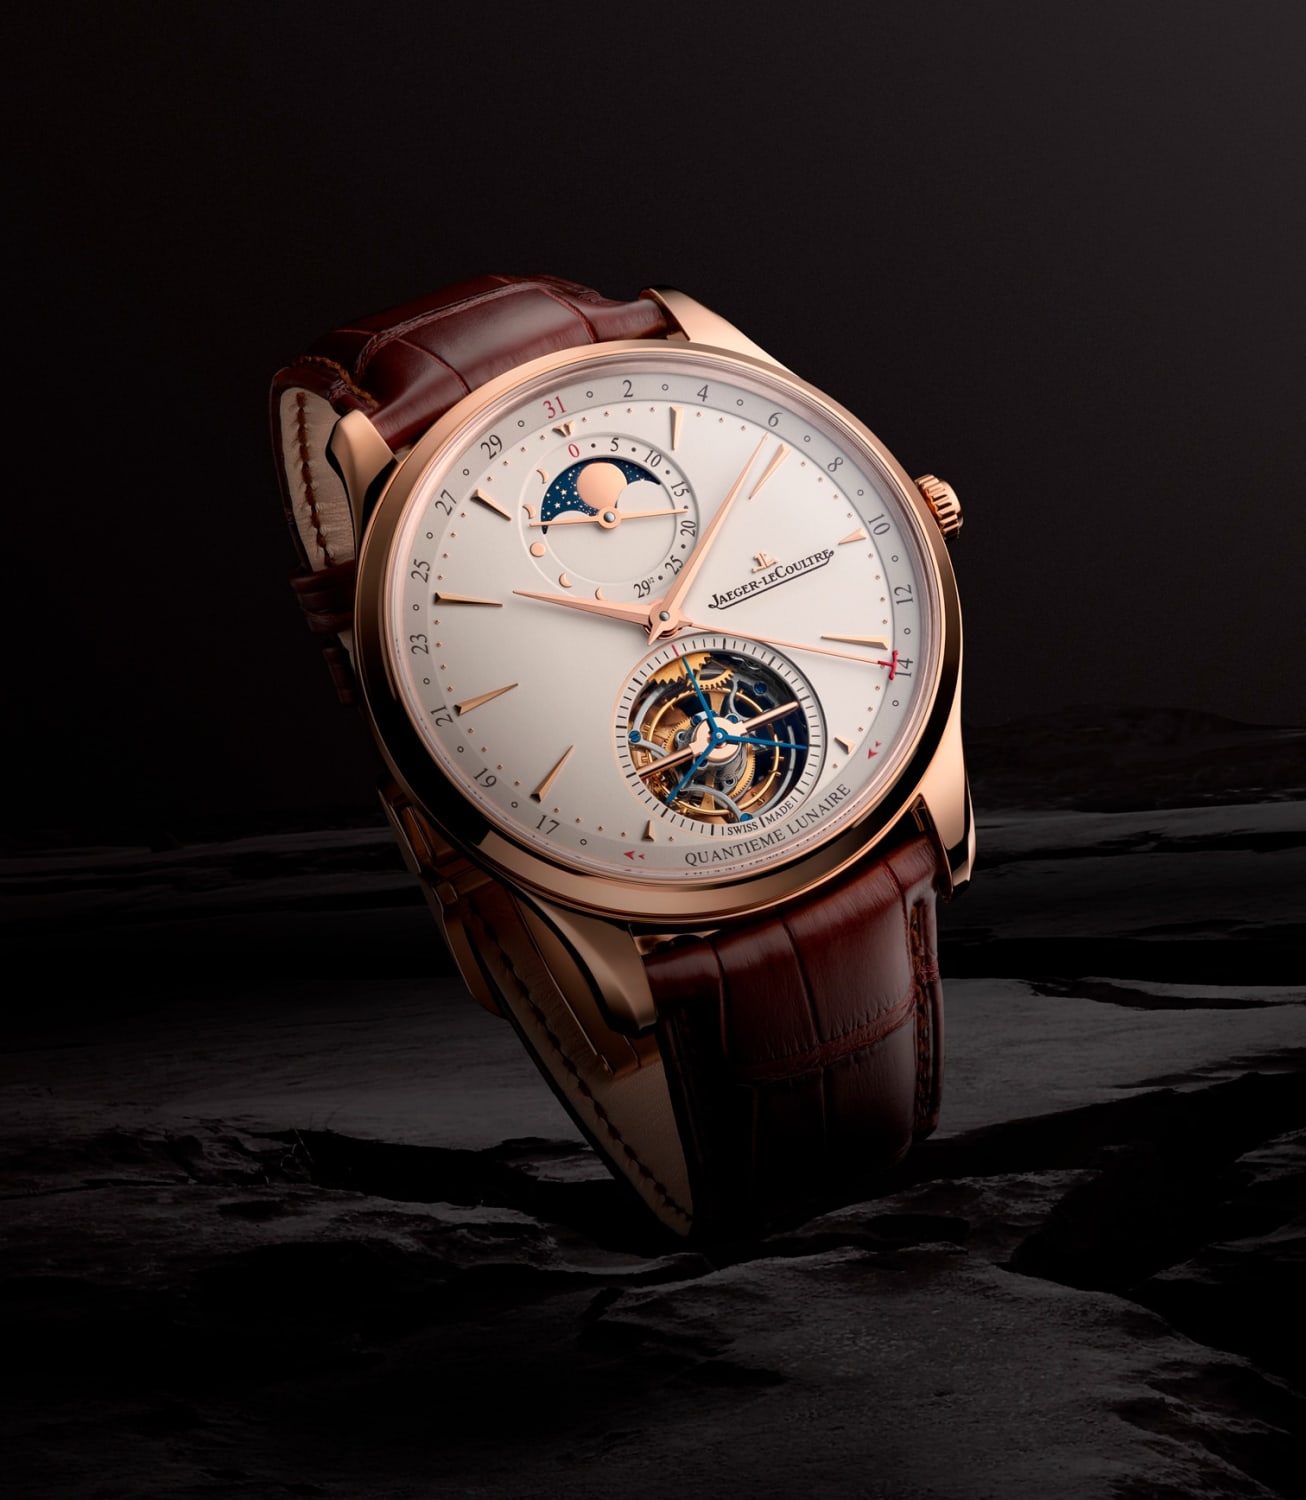 Jaeger-LeCoultre presents a new Master Ultra Thin uniting a moon phase display with a tourbillon